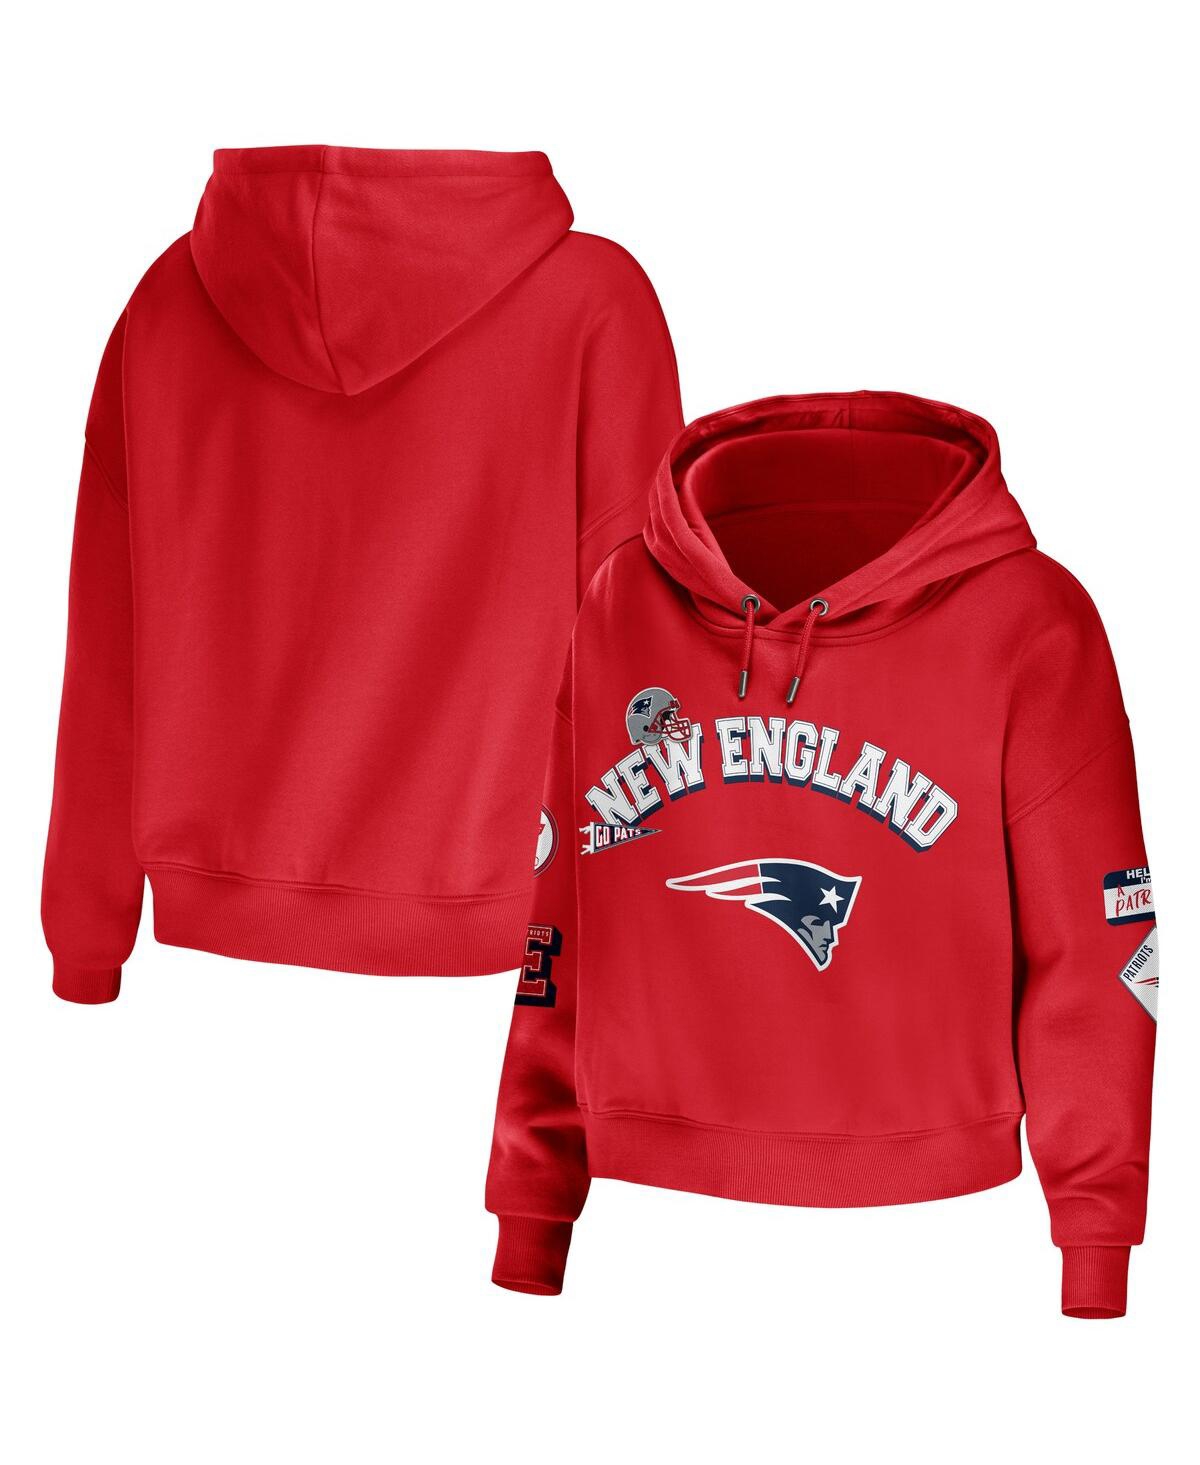 Shop Wear By Erin Andrews Women's  Red New England Patriots Modest Cropped Pullover Hoodie